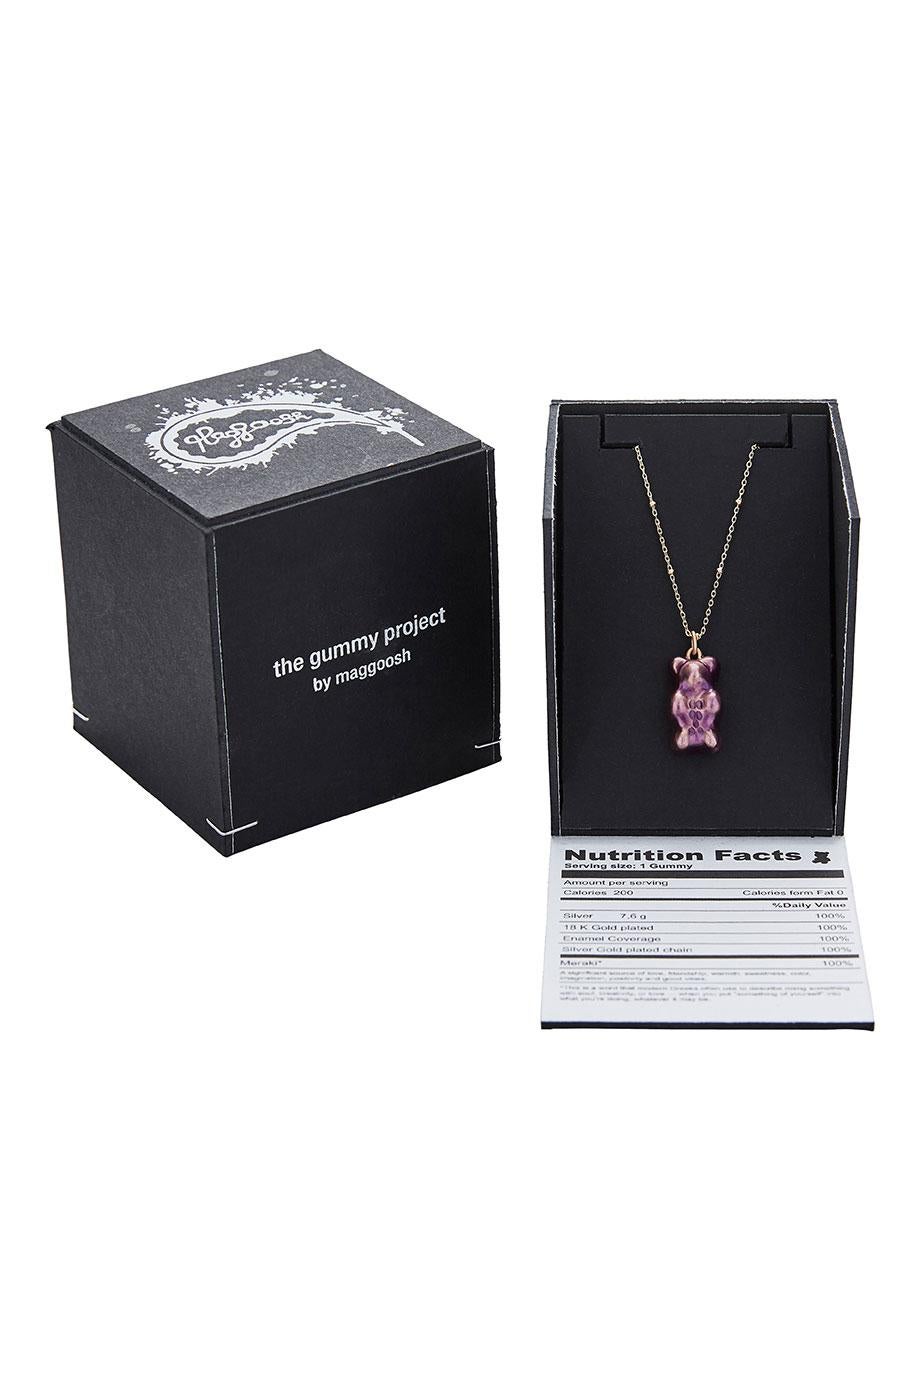 18K gold plated silver gummy bear pendant on silver gold plated chain with transparent black enamel coverage. 

The Gummy Project by Maggoosh is a capsule collection inspired by the designer's life in New York City and her passion for breakdancing